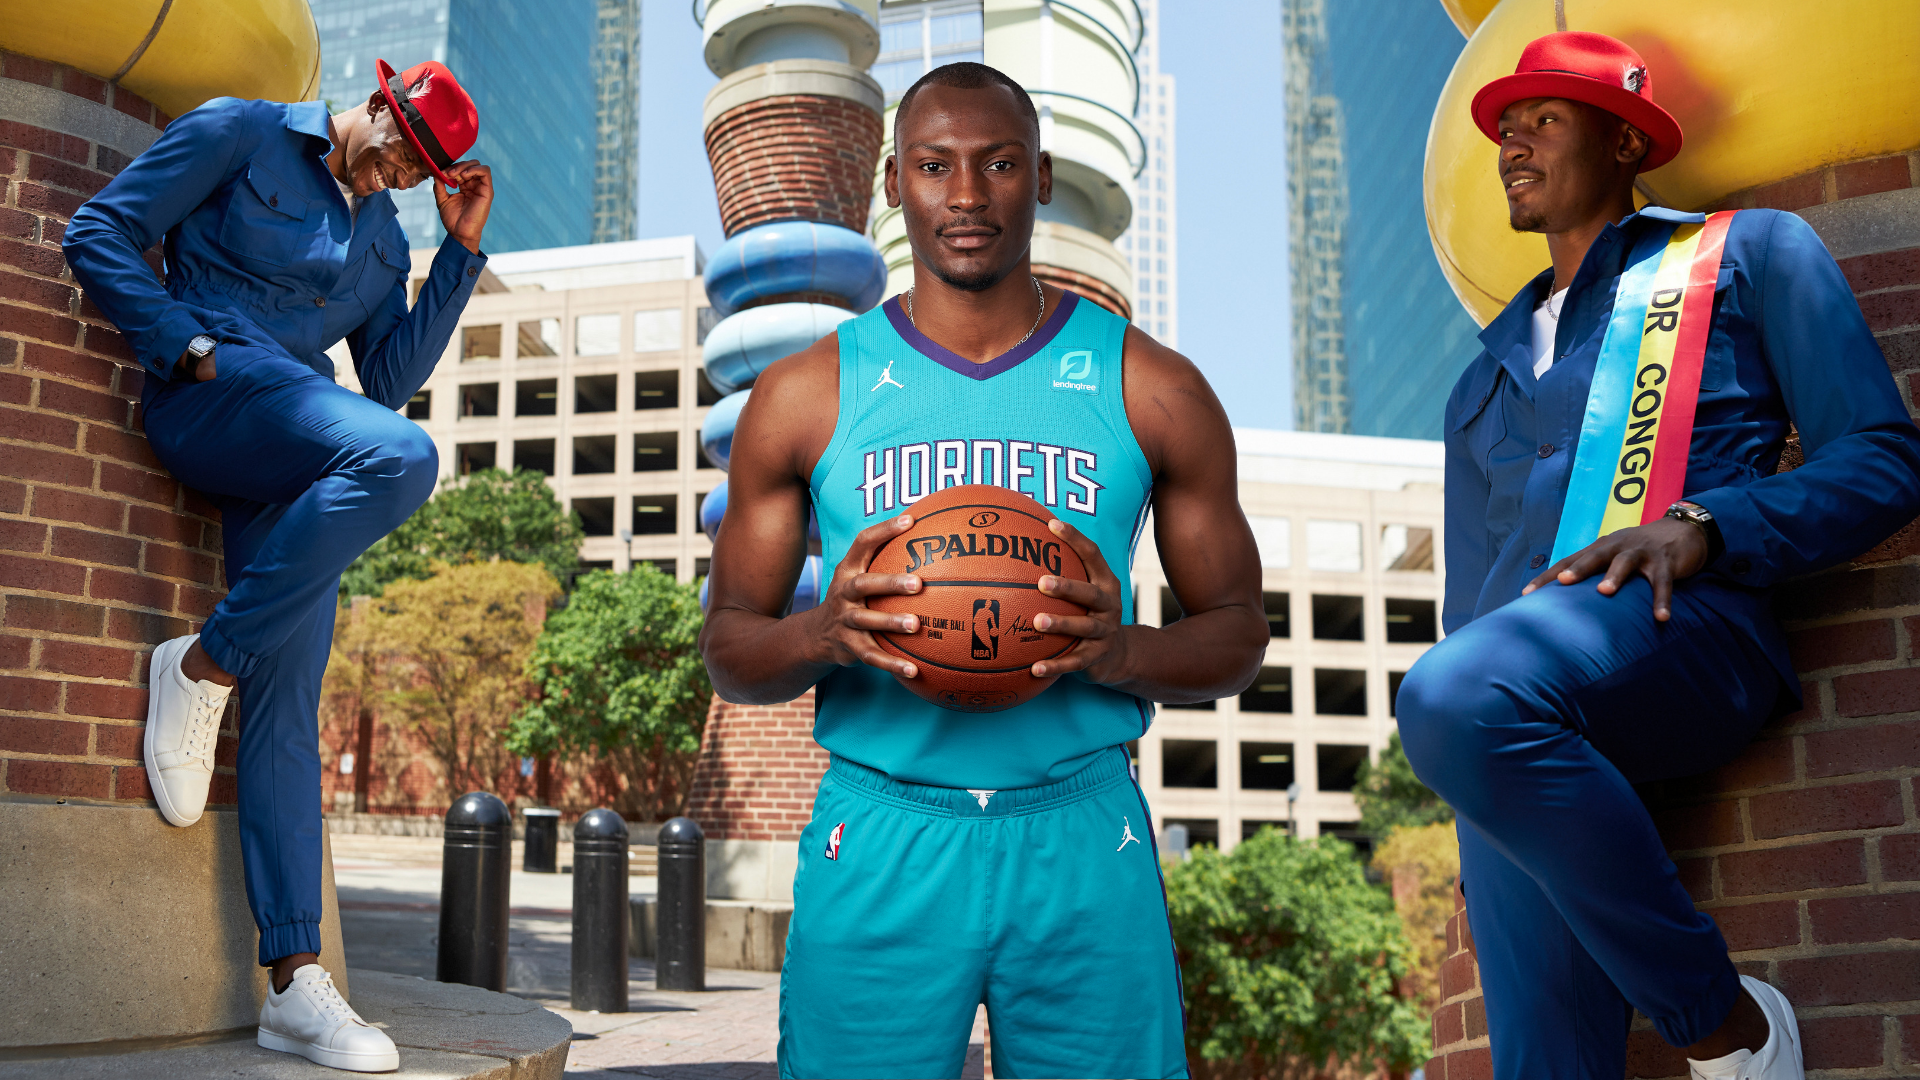 Bismack Biyombo, Hornets Reportedly Agree to New Contract in 2020